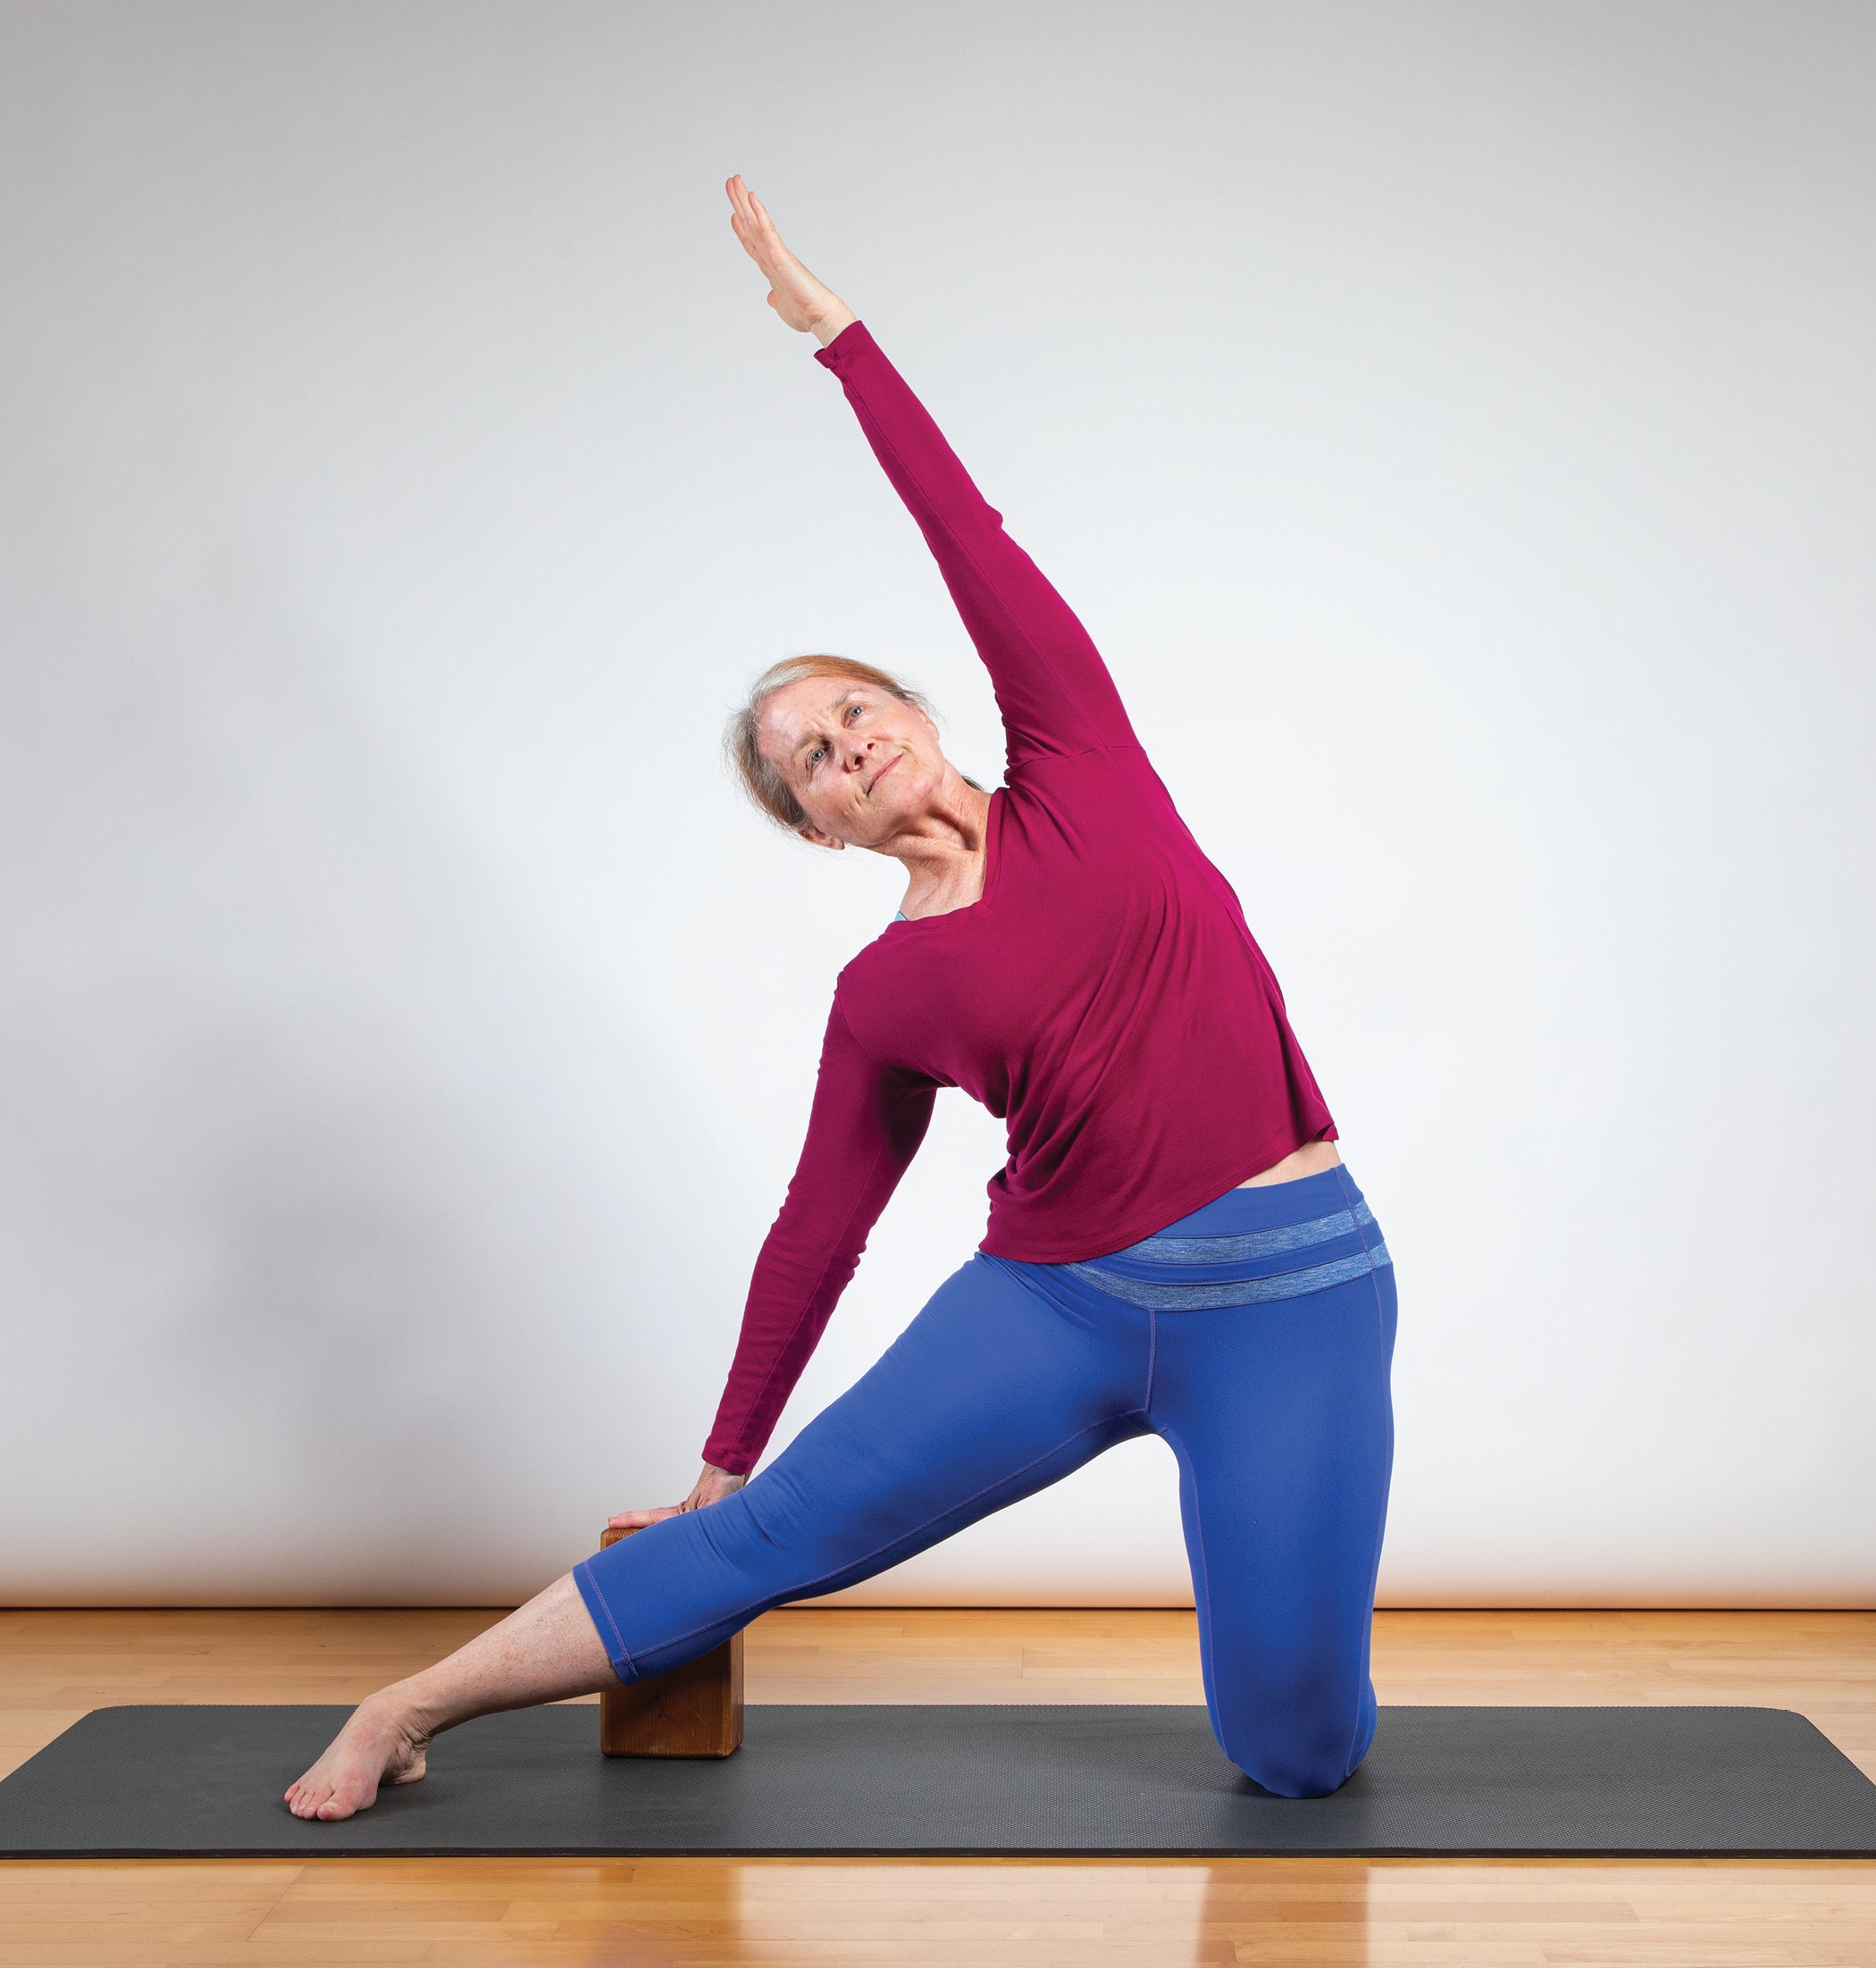 Yoga After Hip Replacement - Dr. Paul Norio Morton, MD